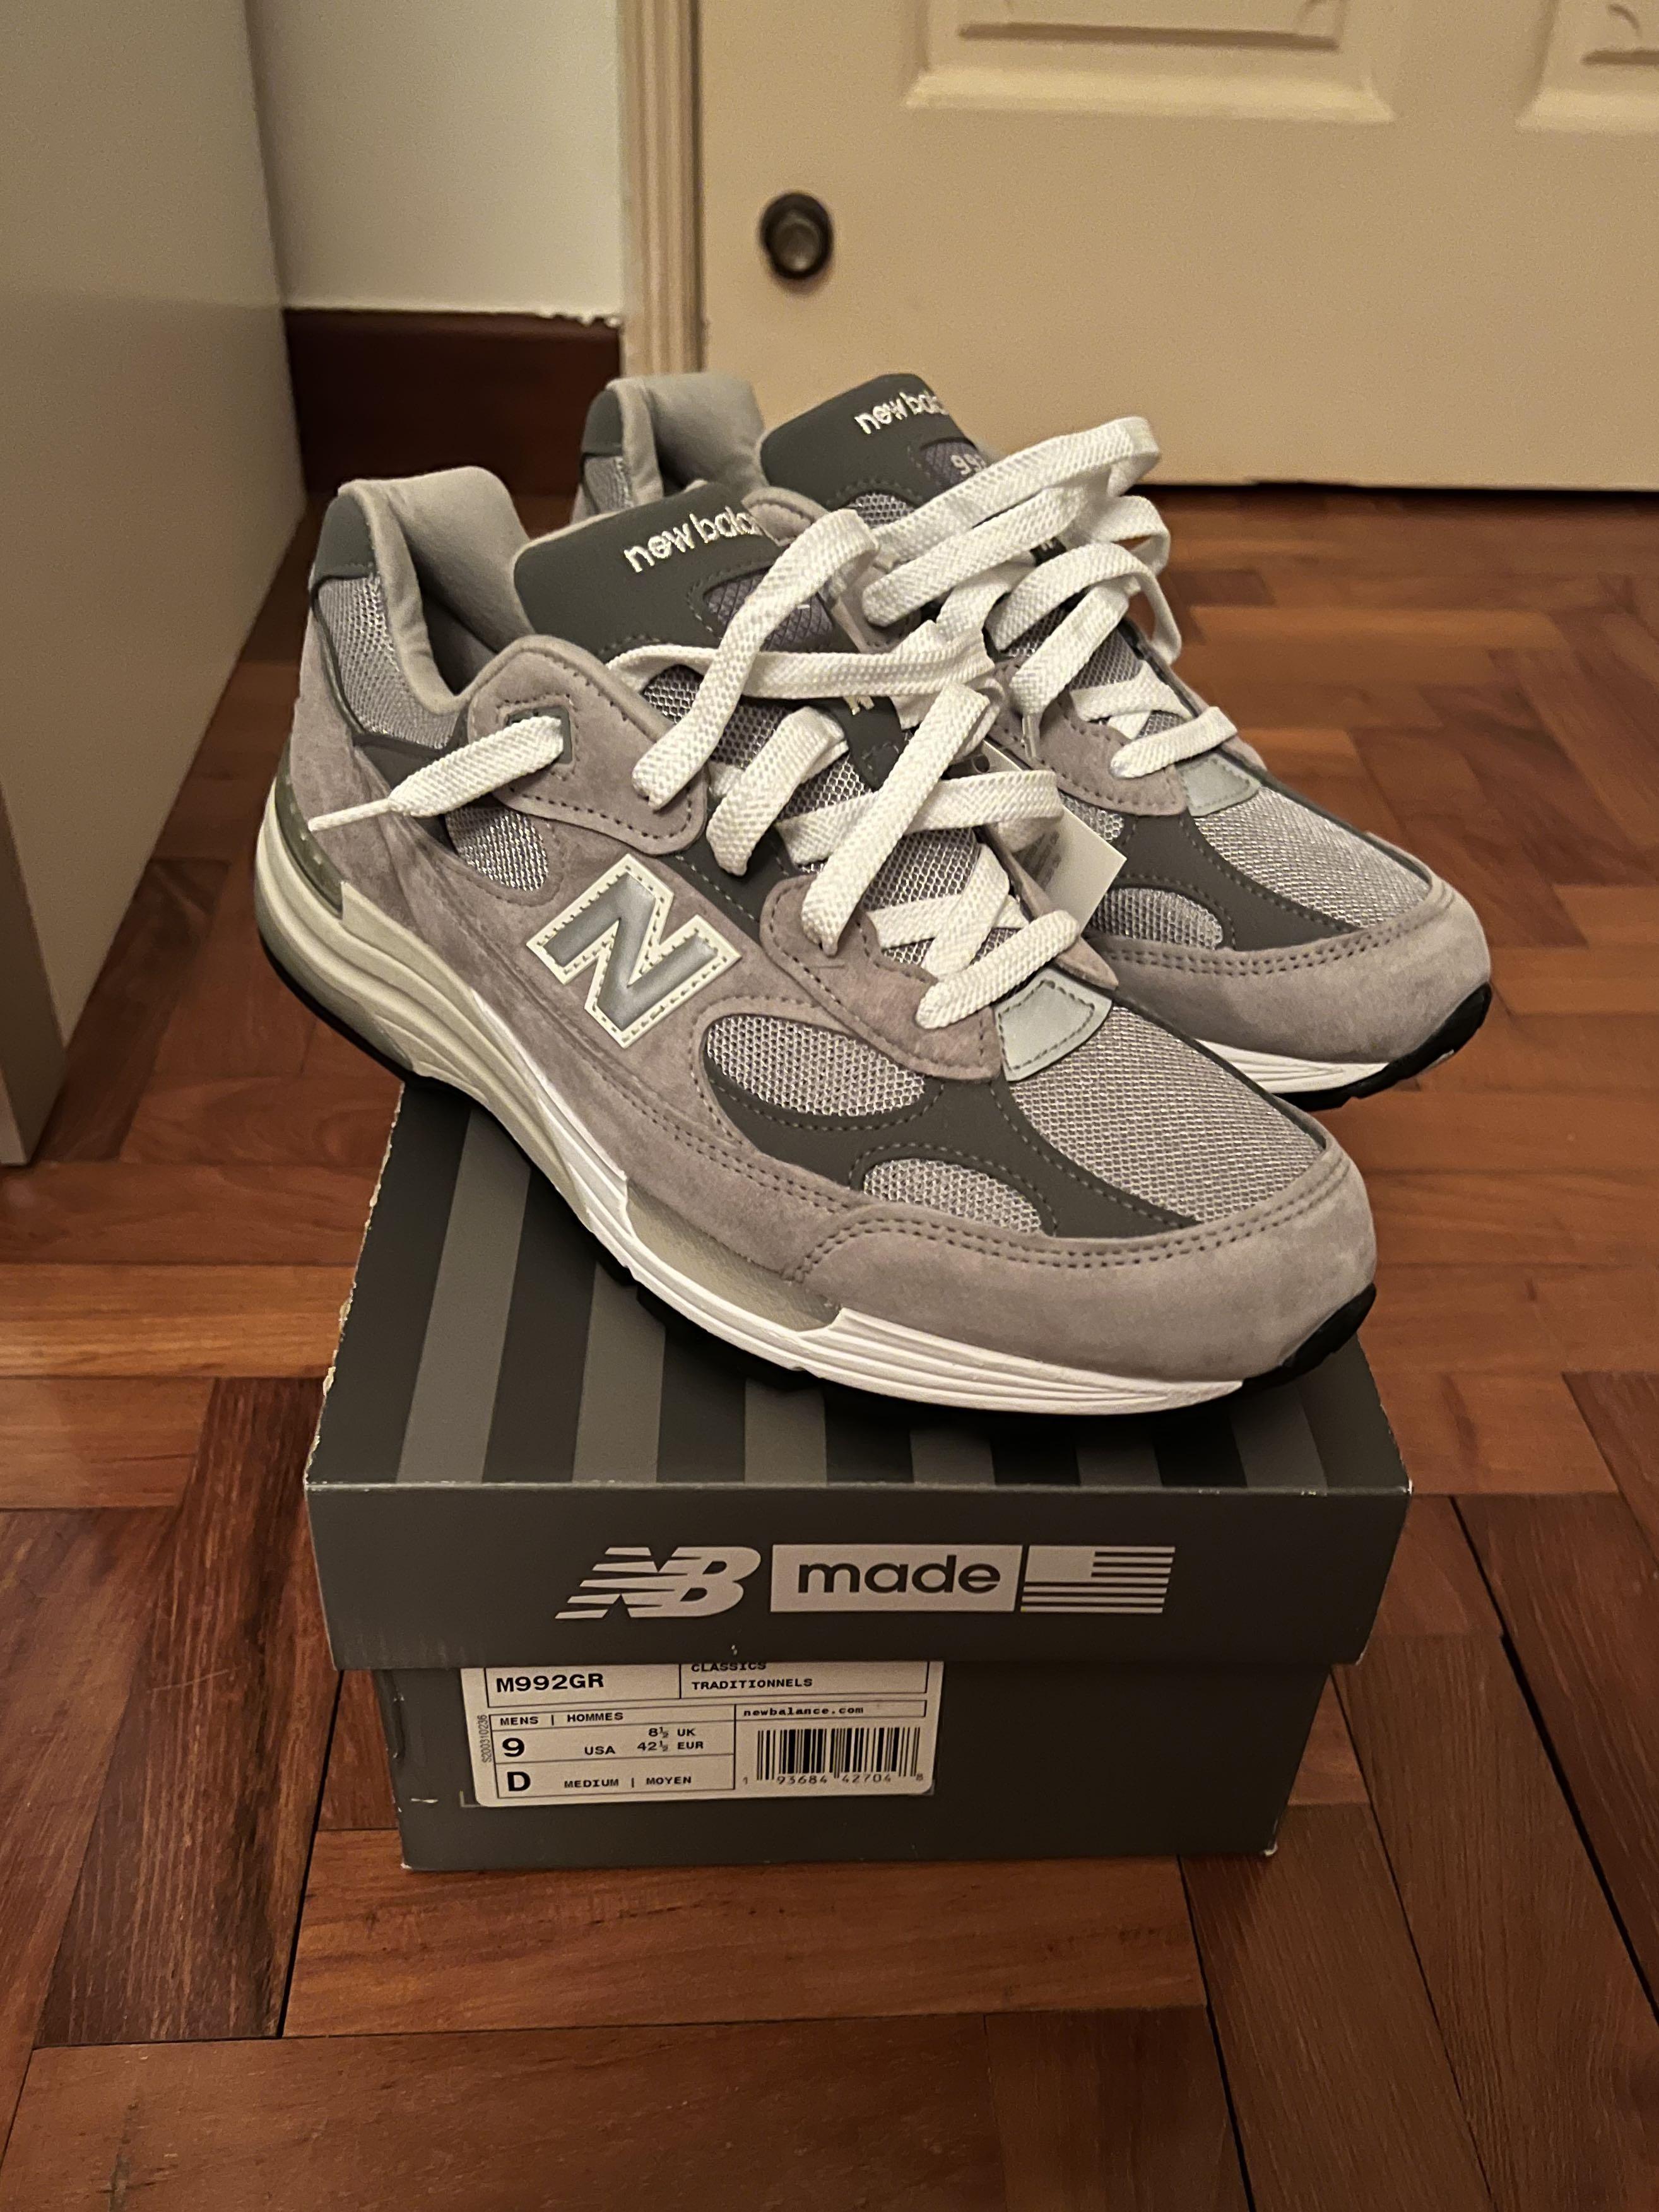 New Balance 992GR, Bulletin Board, Looking For on Carousell